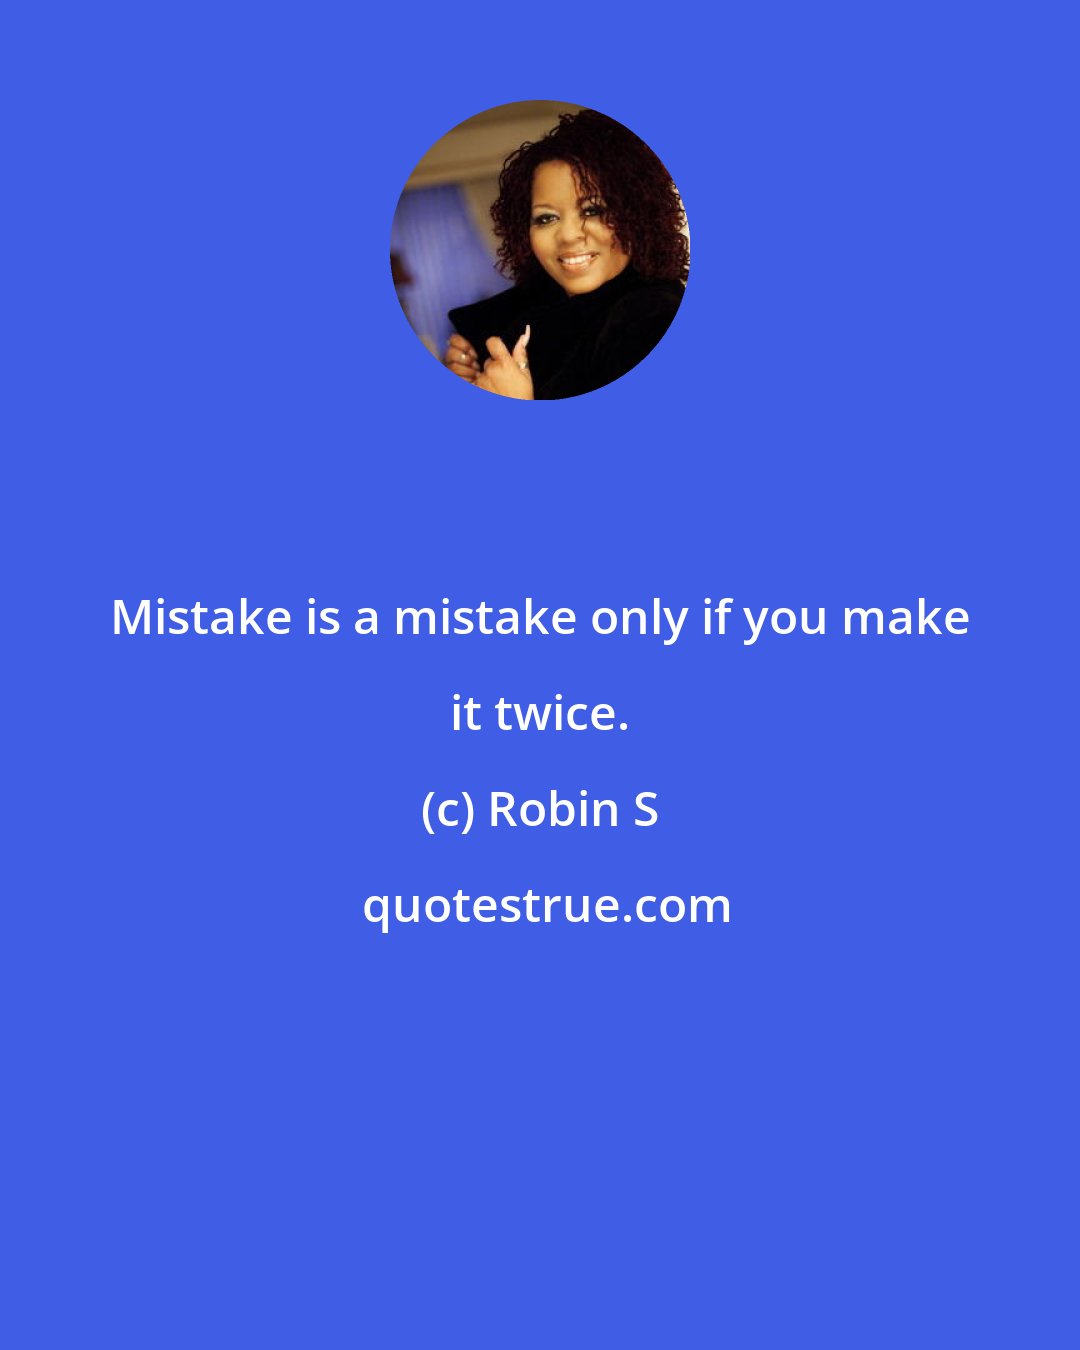 Robin S: Mistake is a mistake only if you make it twice.